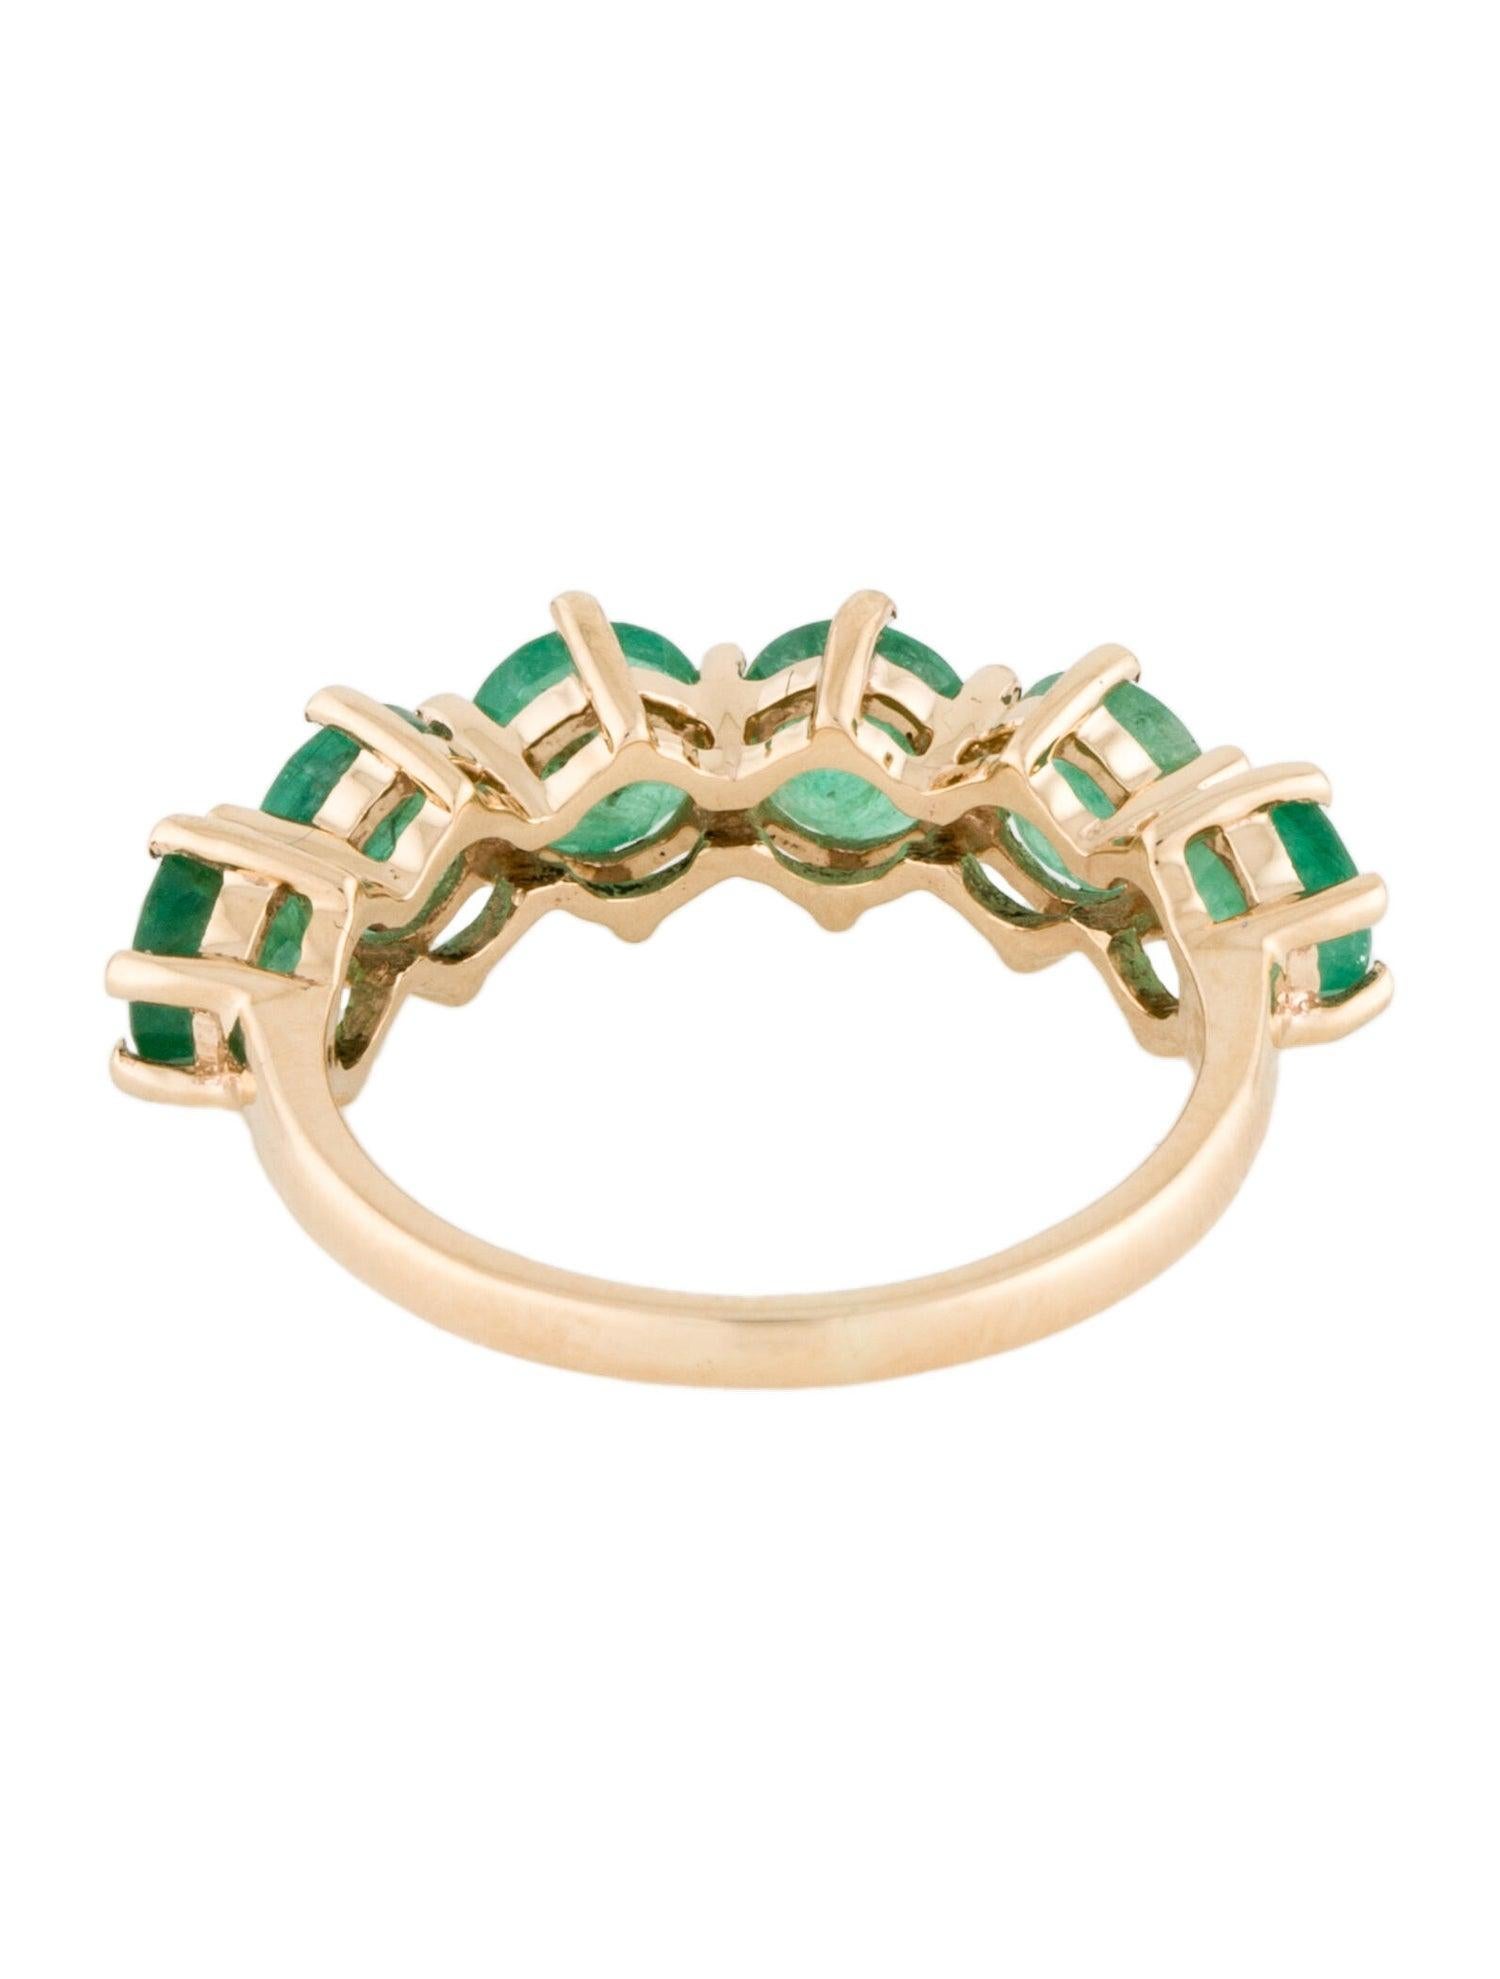 Brilliant Cut 14K Emerald Band Ring 2.29ctw - Size 6.75 - Timeless Elegance, Luxurious Design For Sale